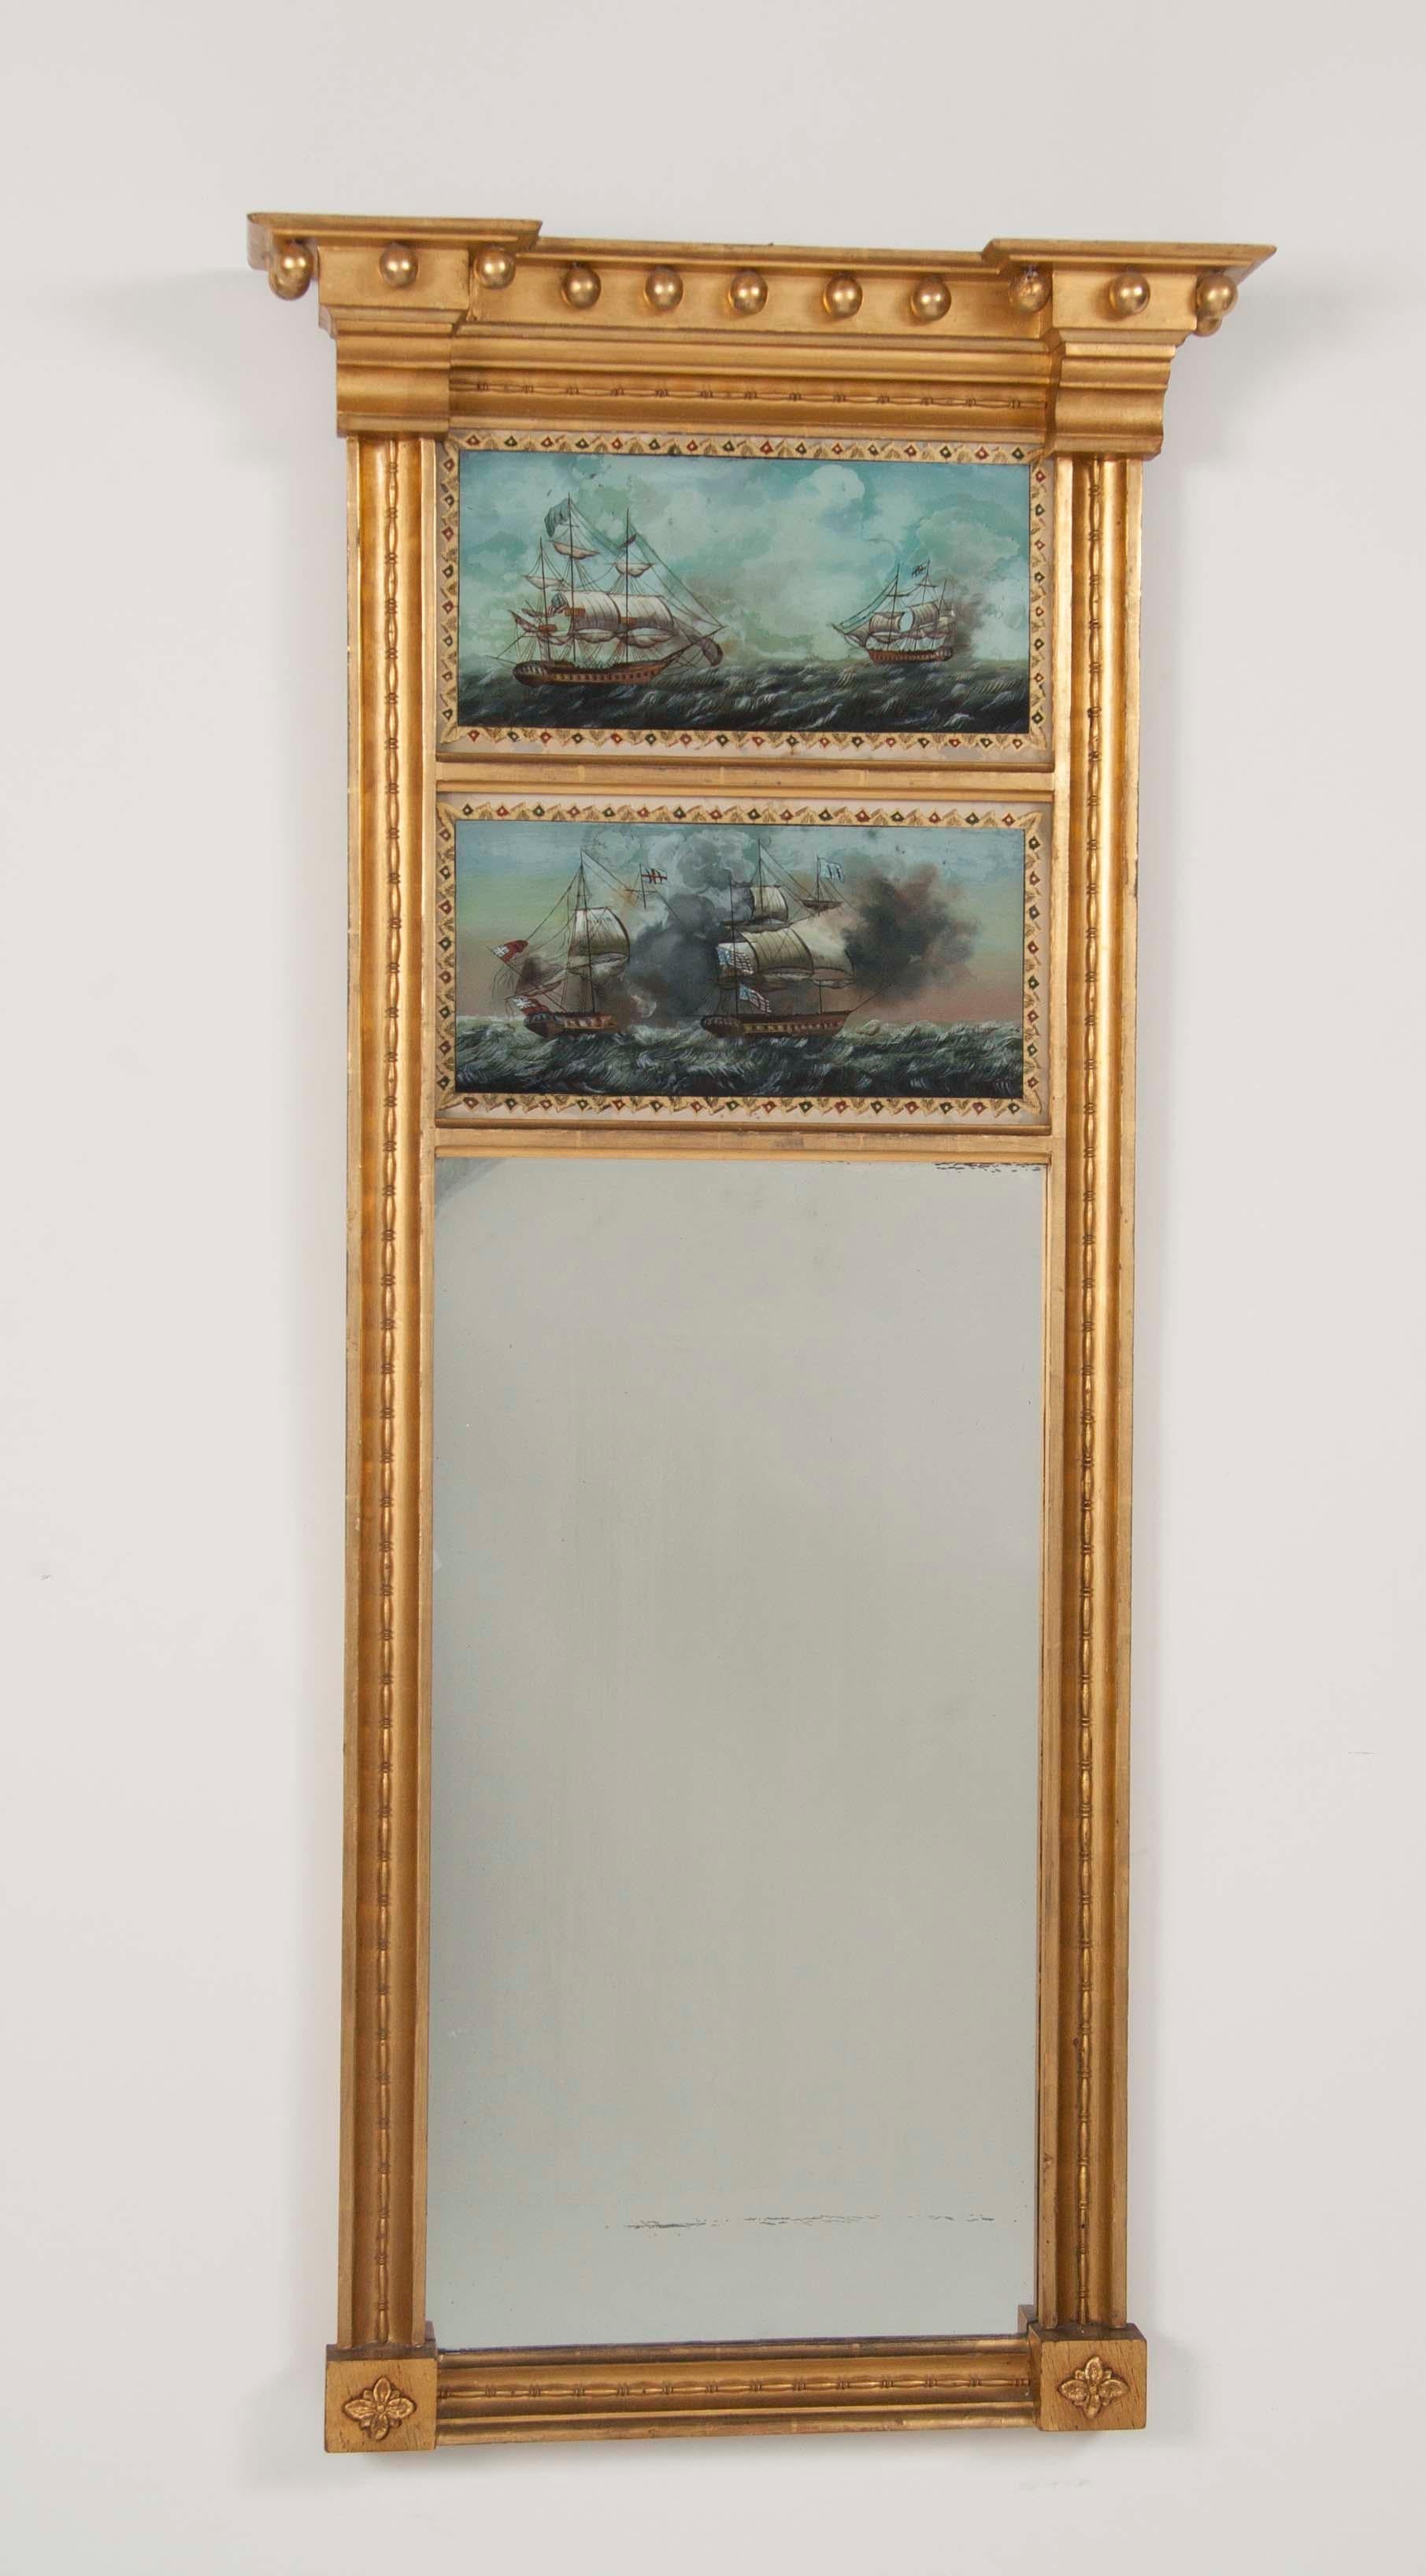 A beautifully giltwood Federal style mirror featuring églomisé scenes of the USS Constitution and HMS Guerriere, a famous early naval battle in the war of 1812 won by USS Constitution and frequently honored in these mirror panels.

FW 1162.